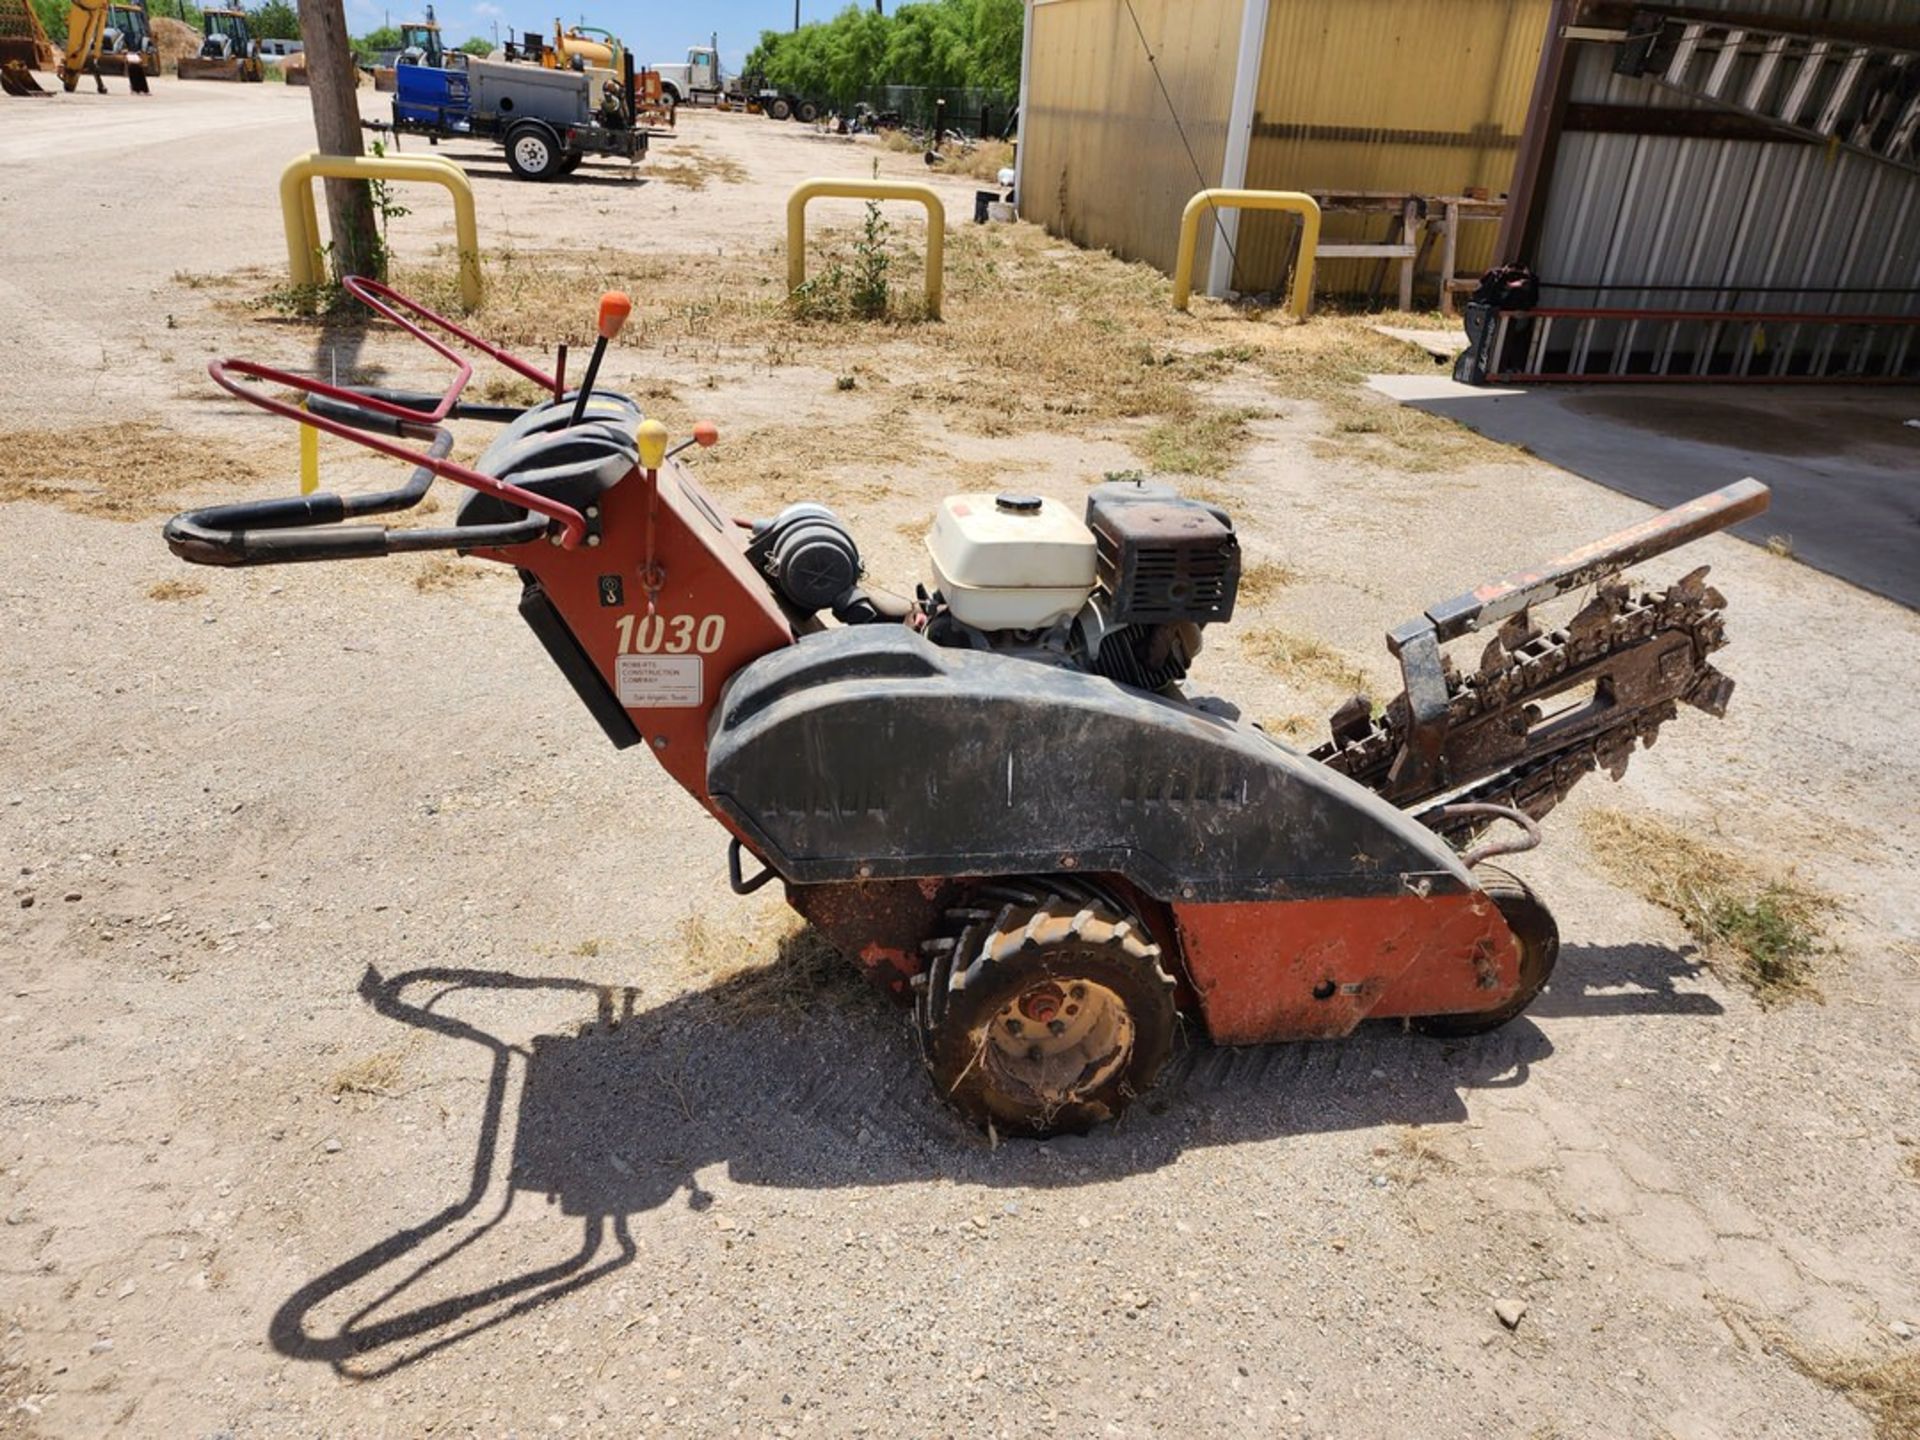 Ditch Witch Trencher W/ Honda 13.0 GX390 Motor (No Tag) - Image 3 of 9